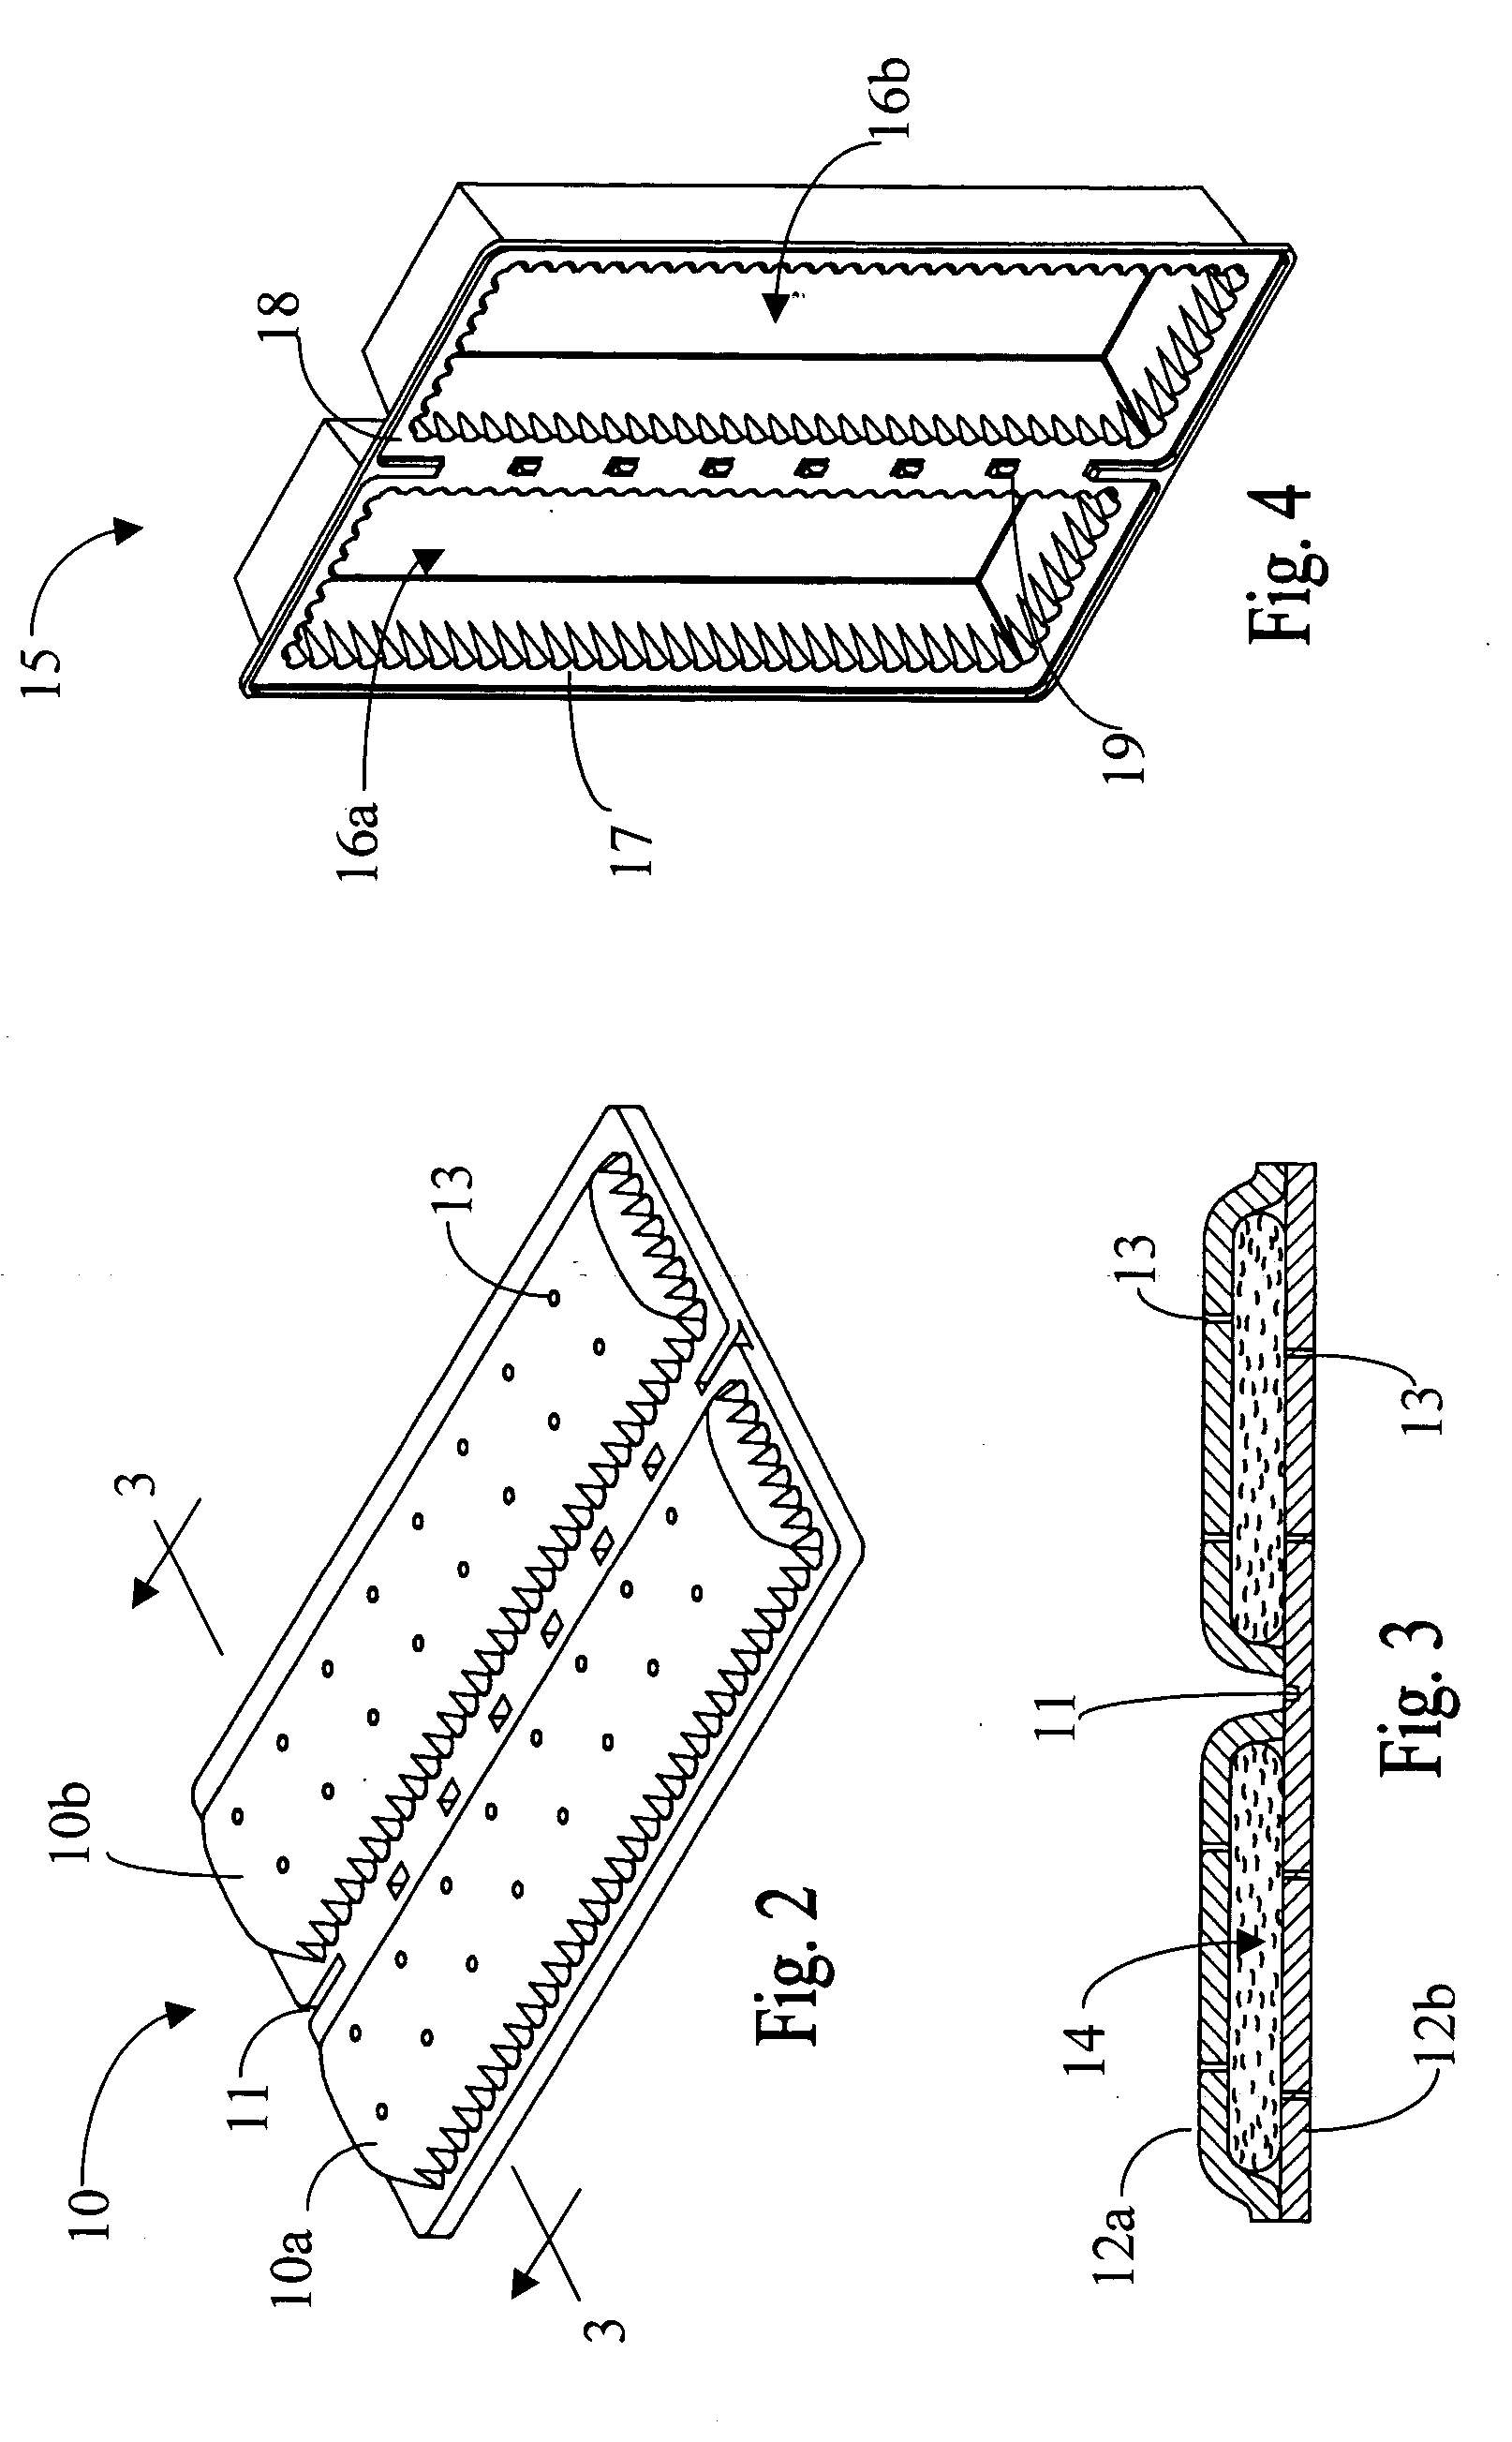 Process for preparing filled cracker products